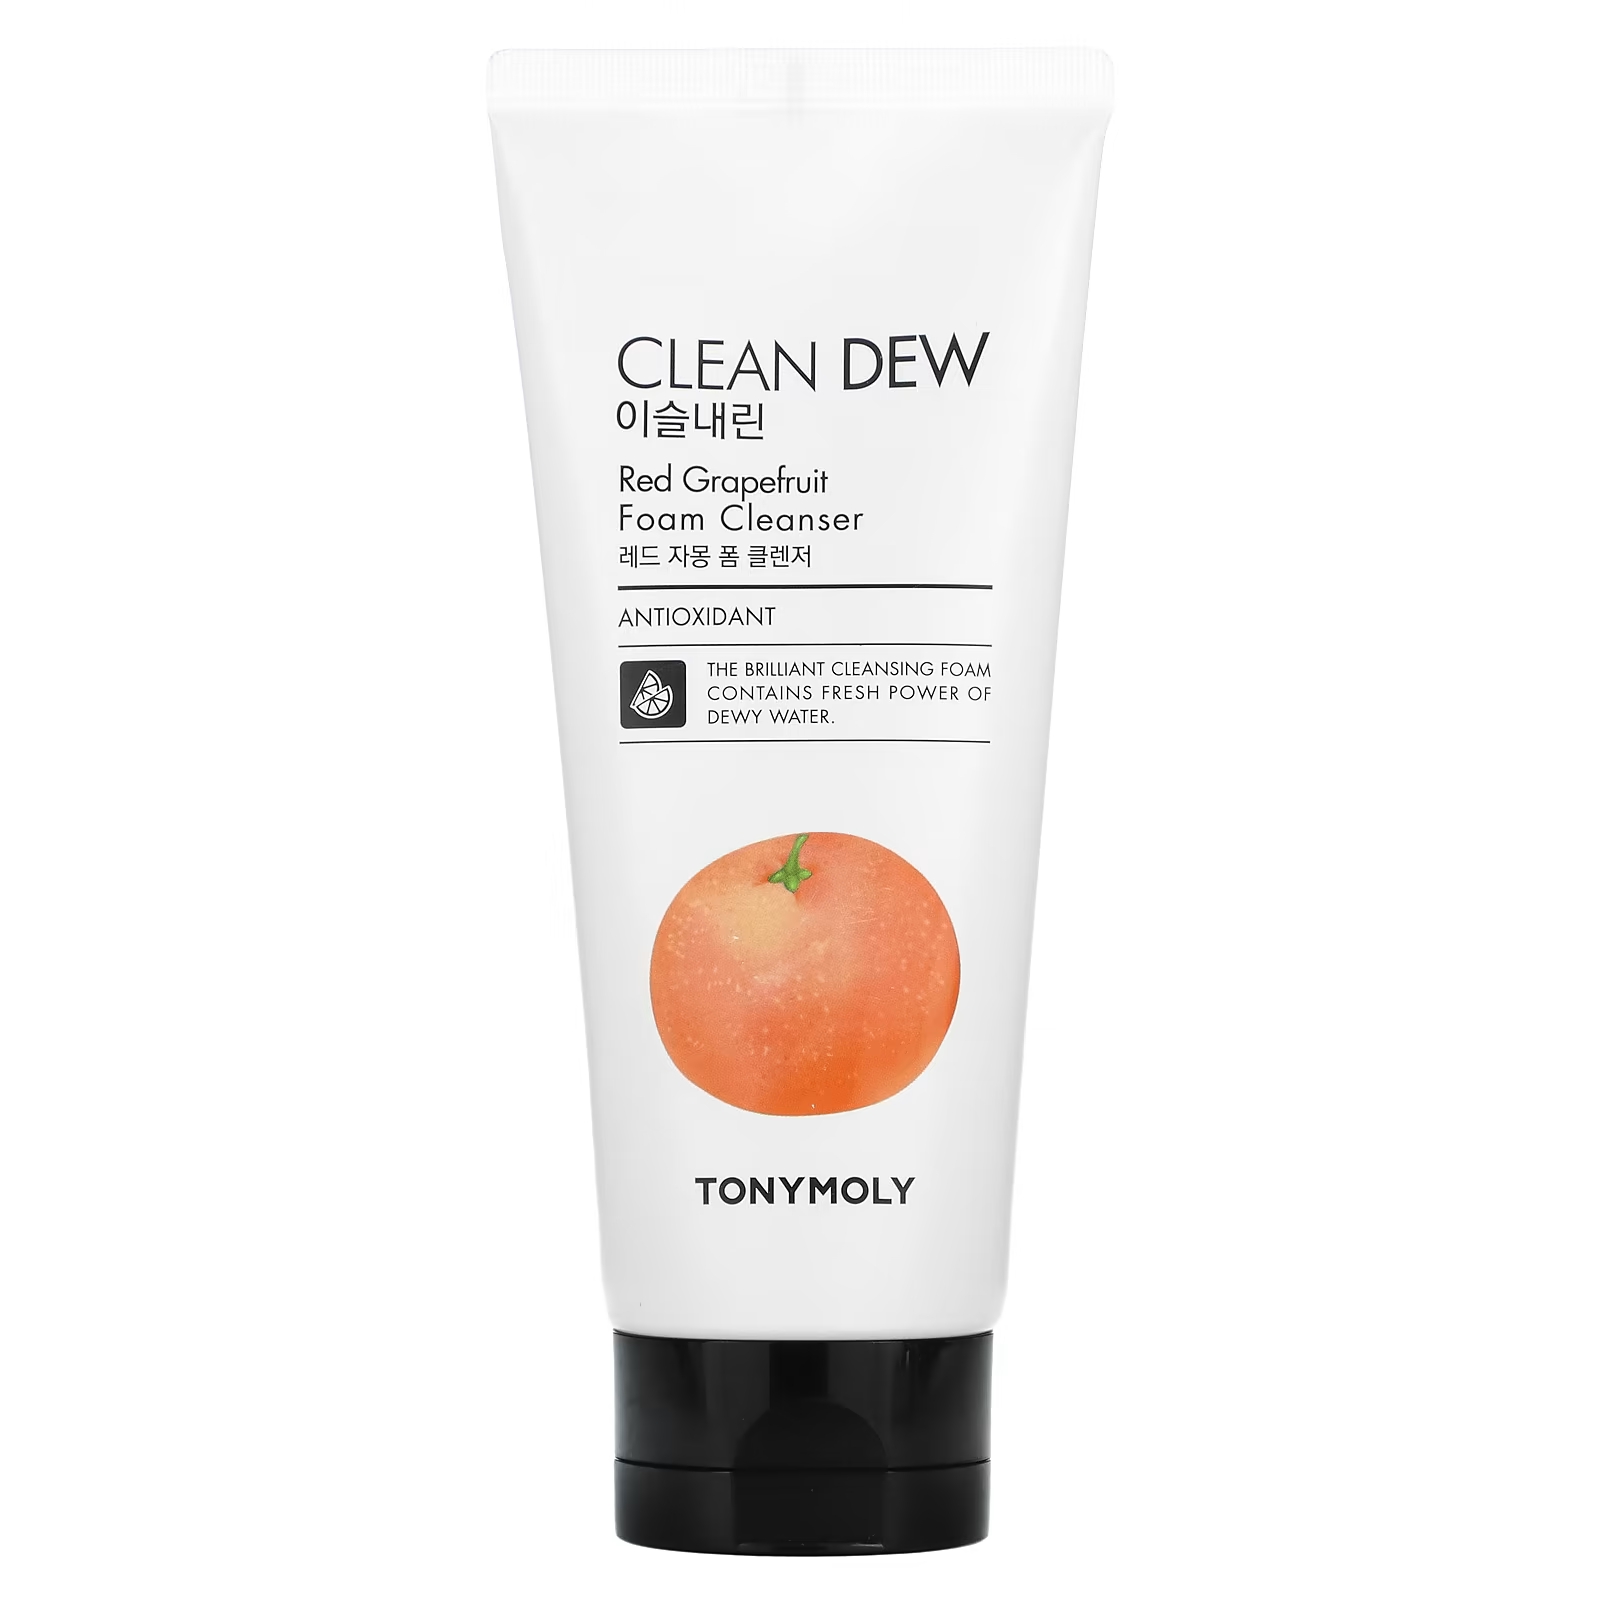 Tony Moly Clean Dew Red Grapefruit Очищающая пенка 180 мл tony moly clean dew очищающая пенка с лимоном 180 мл